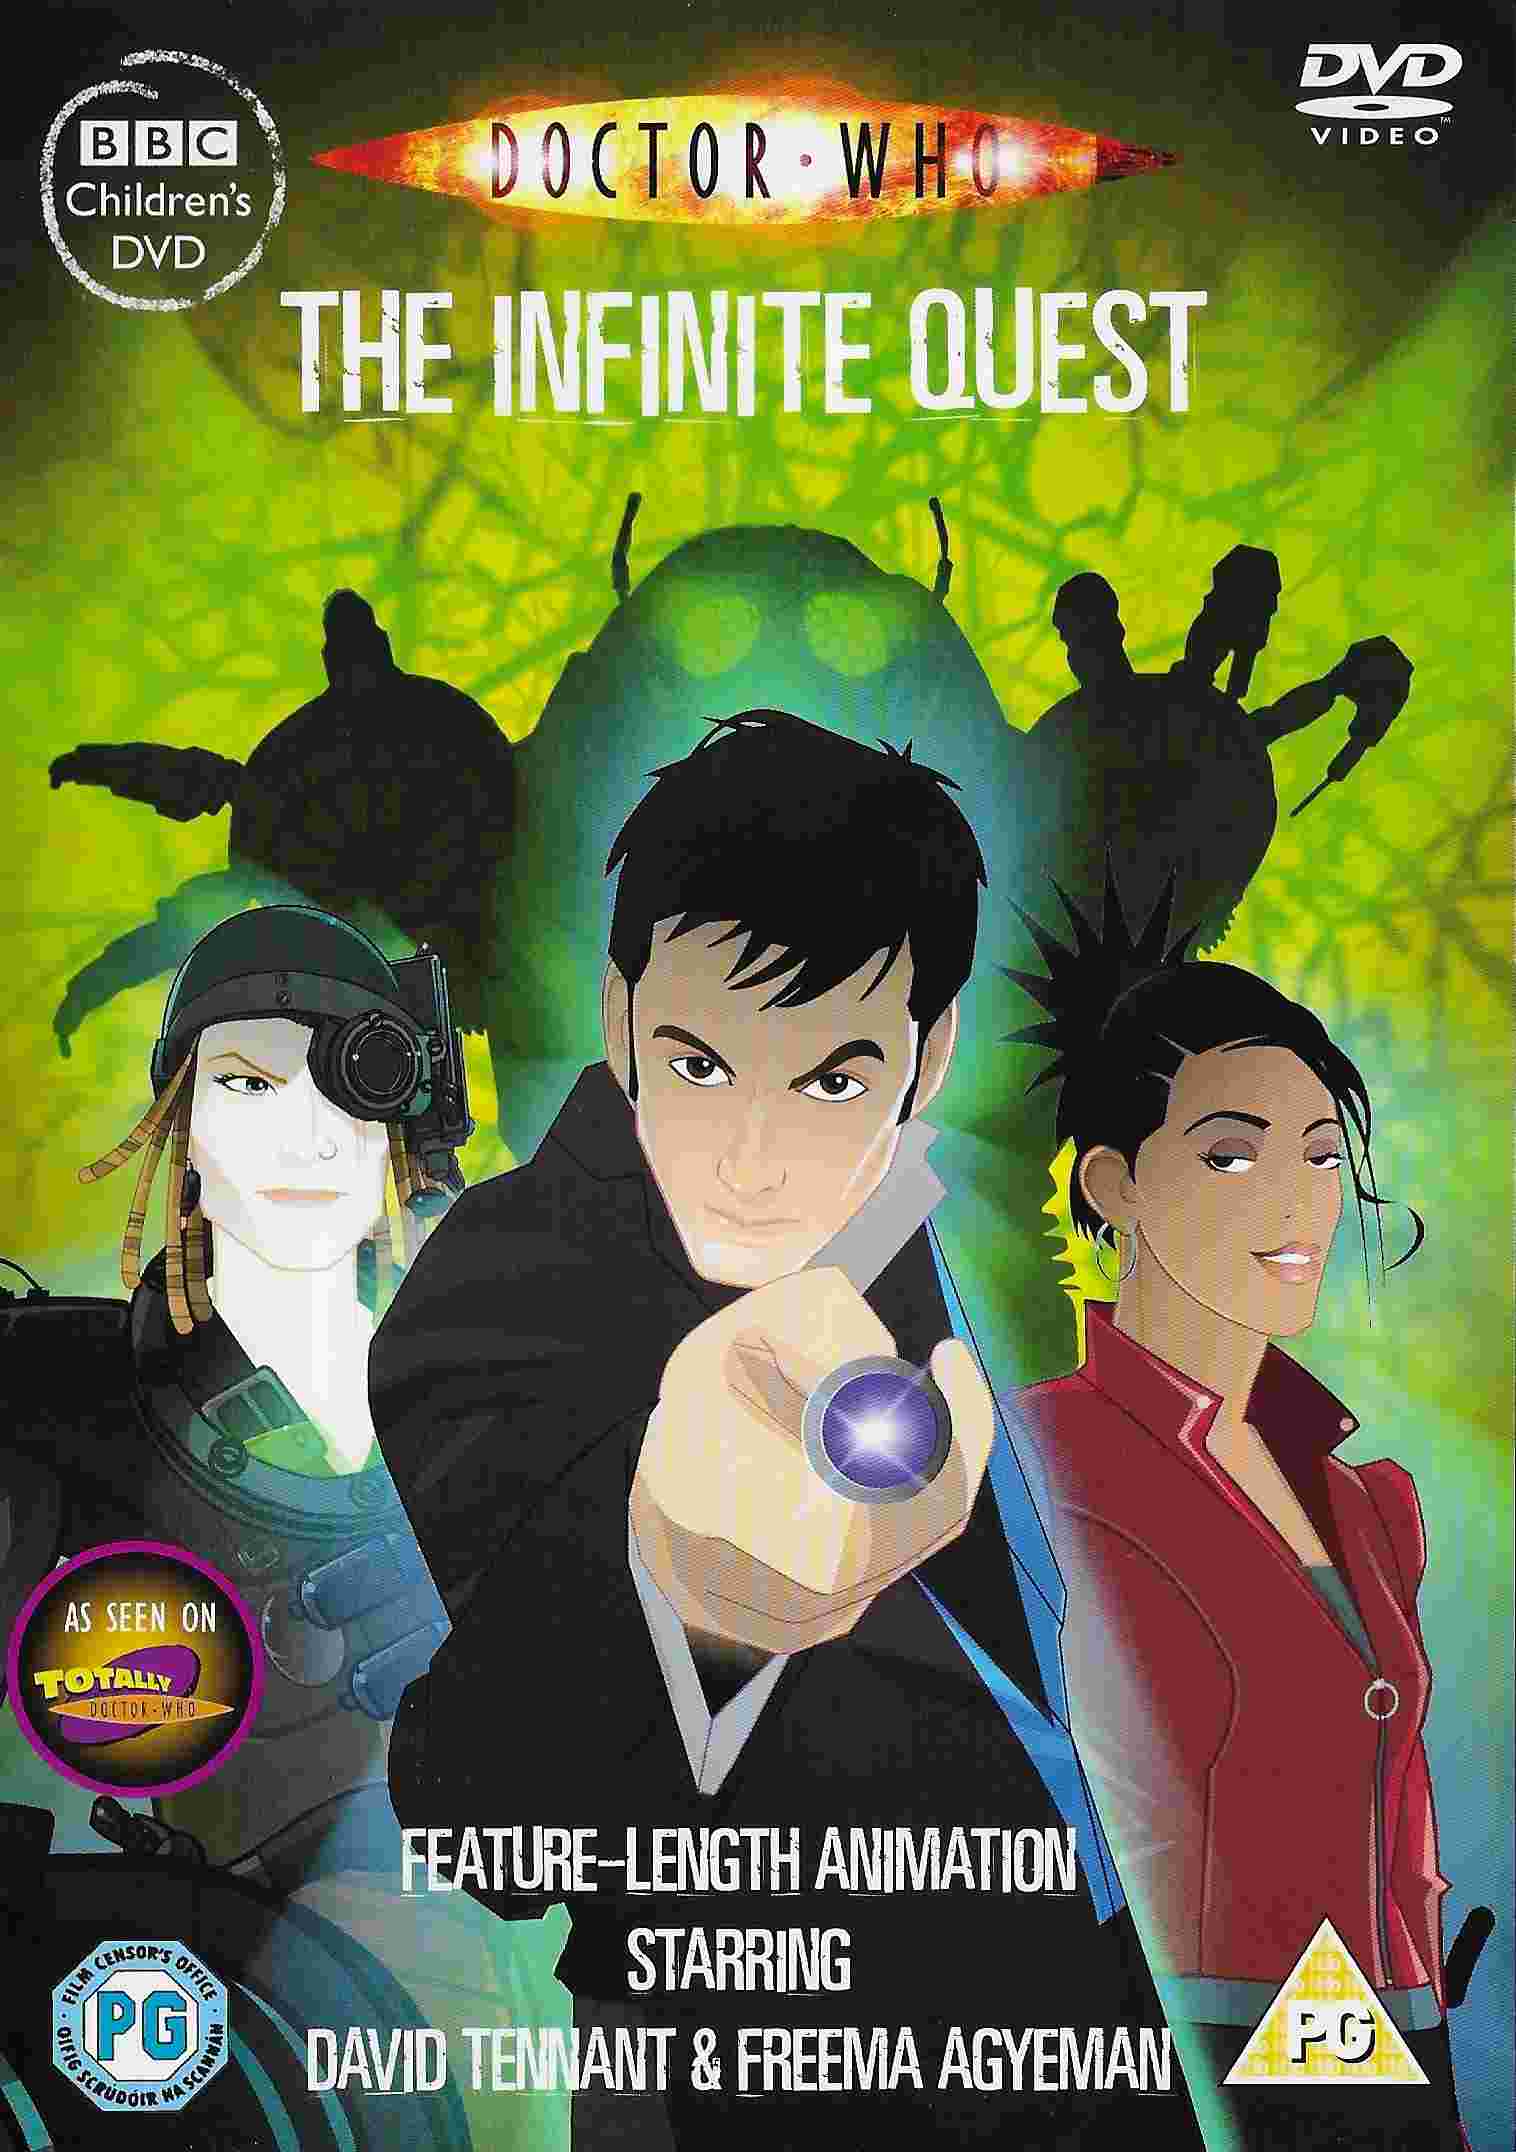 Picture of BBCDVD 2452 Doctor Who - The infinite quest by artist Alan Barnes from the BBC dvds - Records and Tapes library